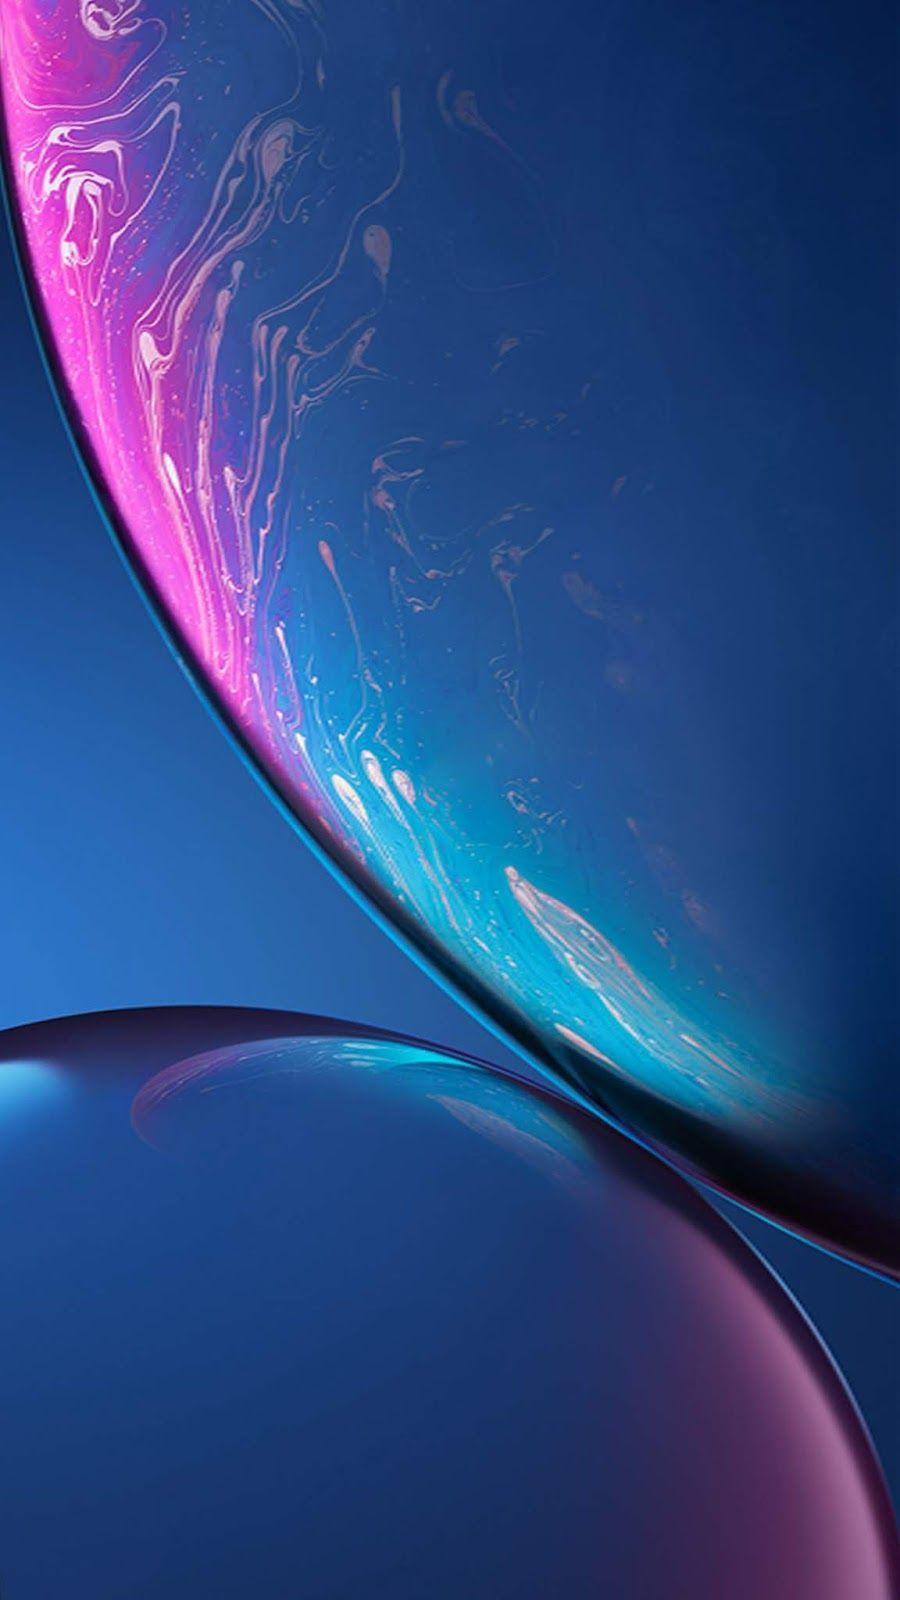 Blue Iphone Xr Wallpapers Top Free Blue Iphone Xr Backgrounds Wallpaperaccess Hd iphone xs max wallpapers.